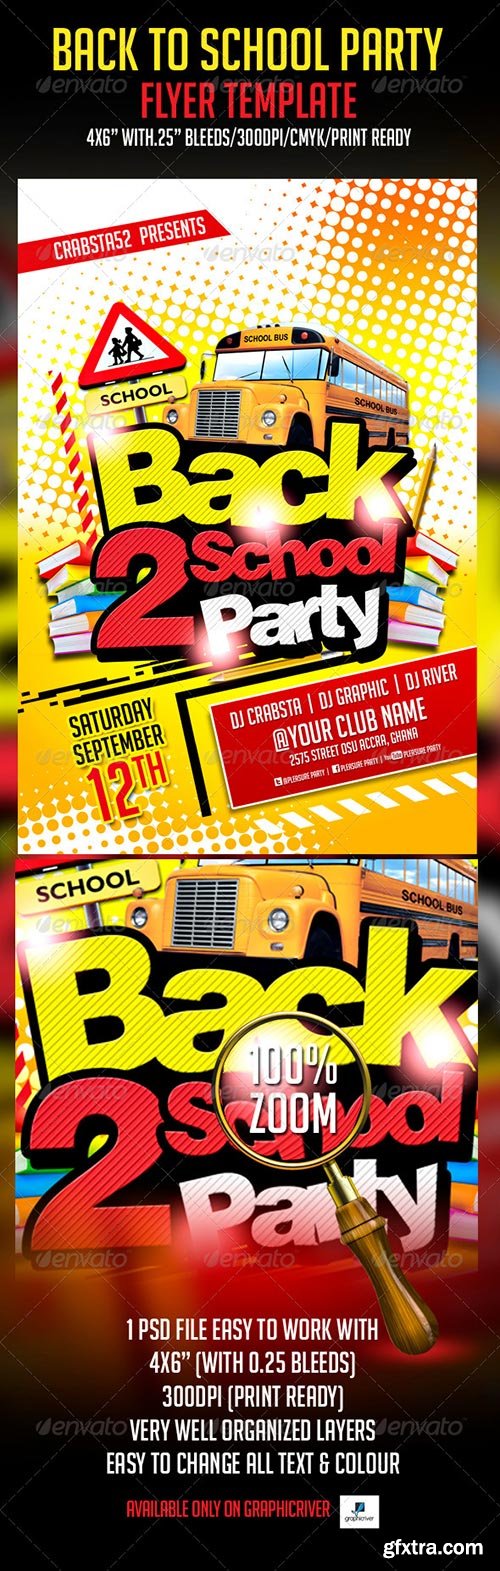 GraphicRiver - Back To School Party Flyer Template 5435543